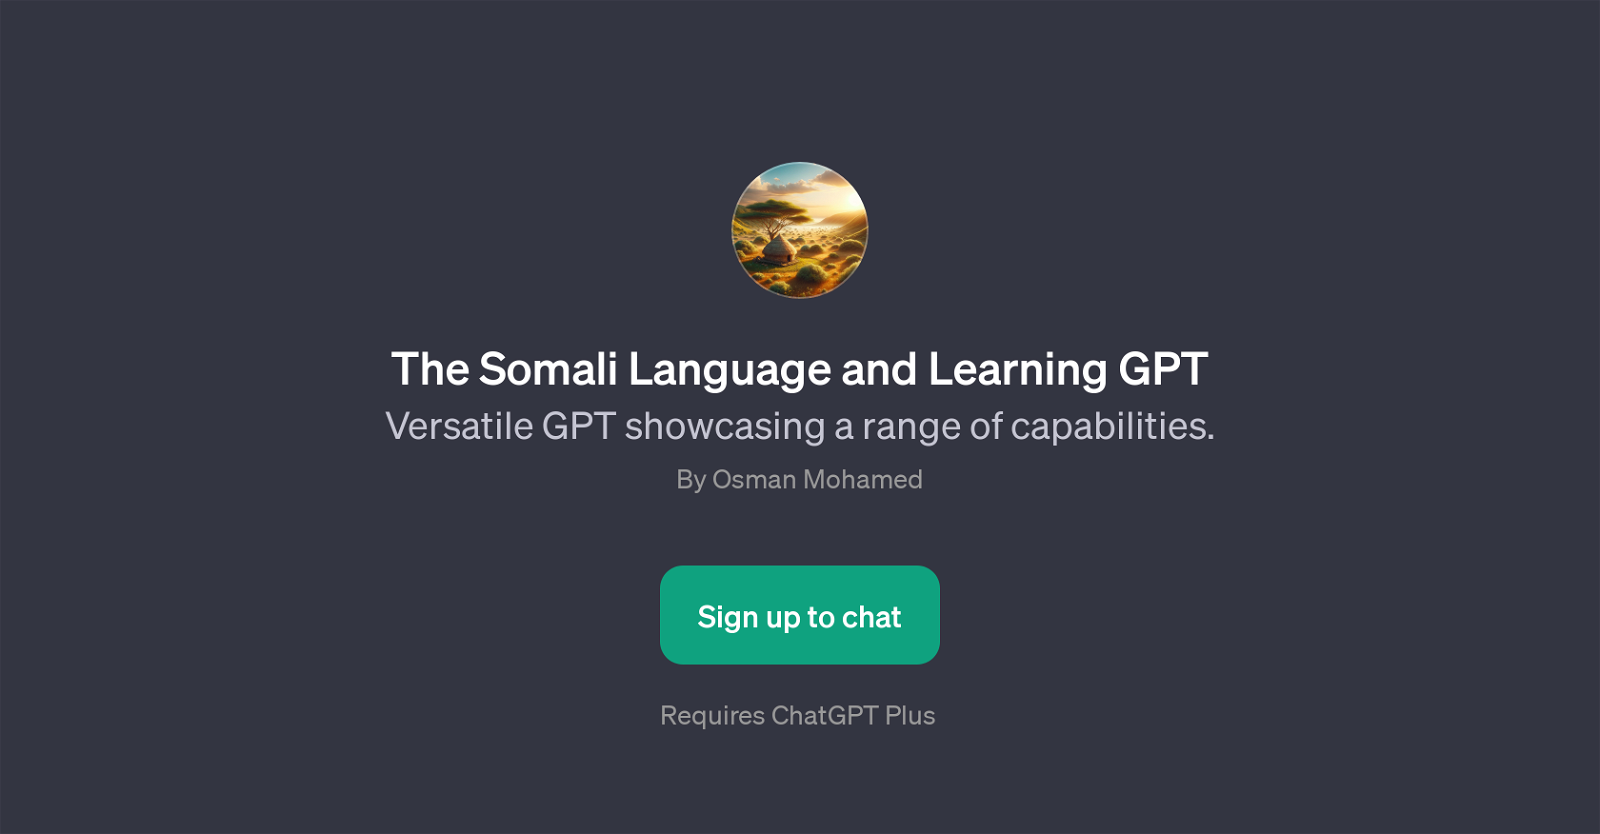 The Somali Language and Learning GPT website